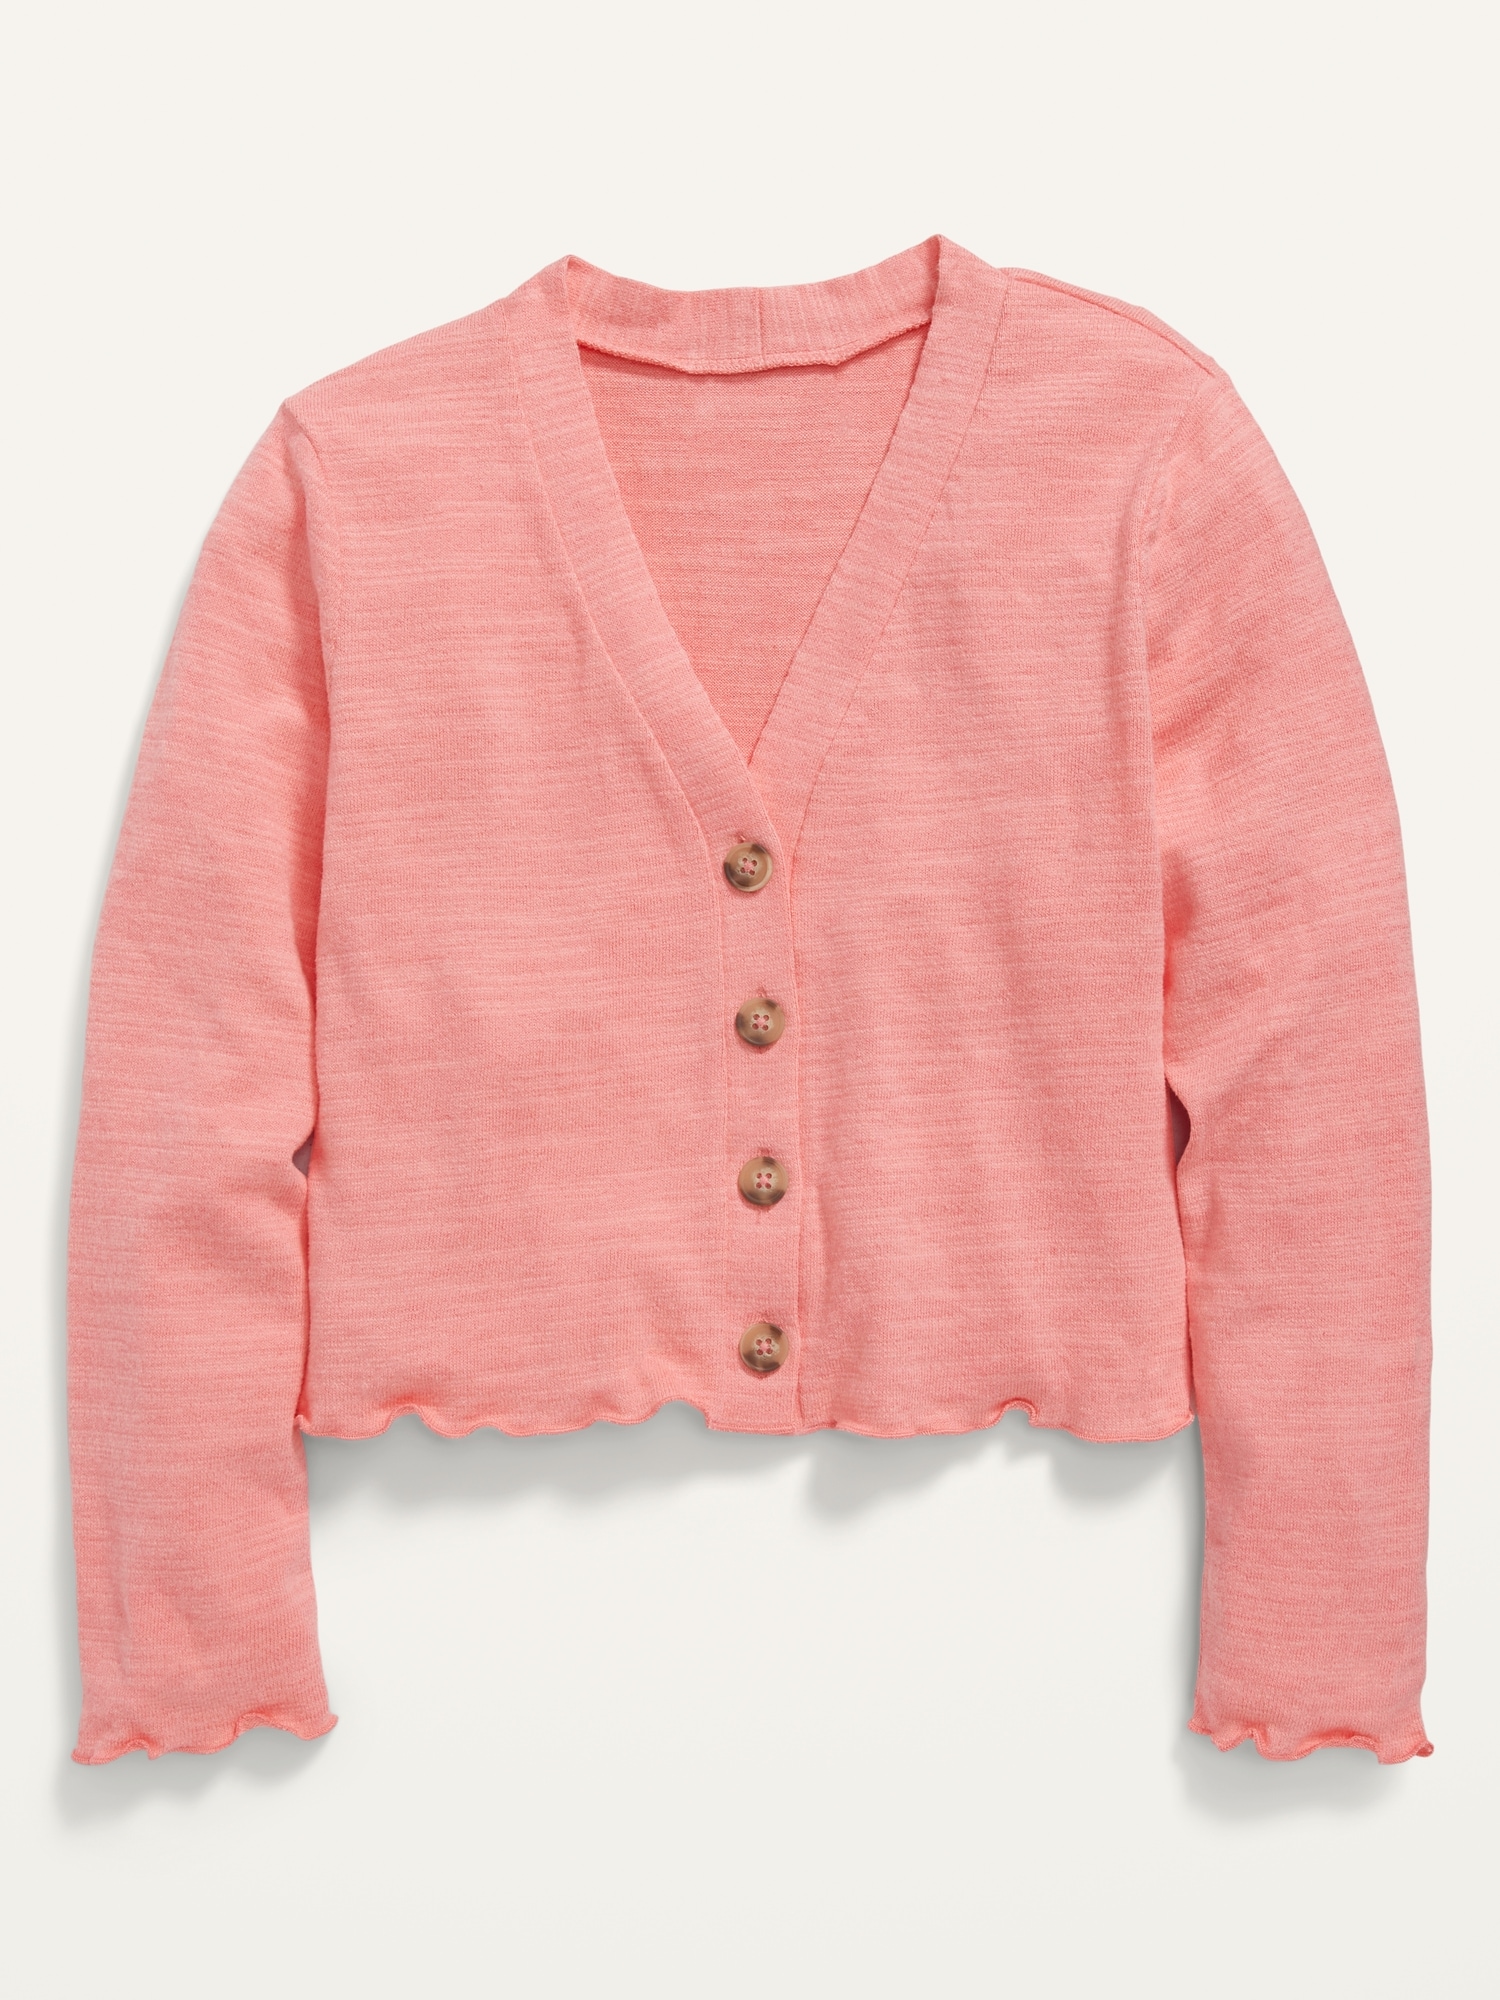 Old Navy Cropped Slub-Knit Button-Front Cardigan Sweater for Girls pink. 1